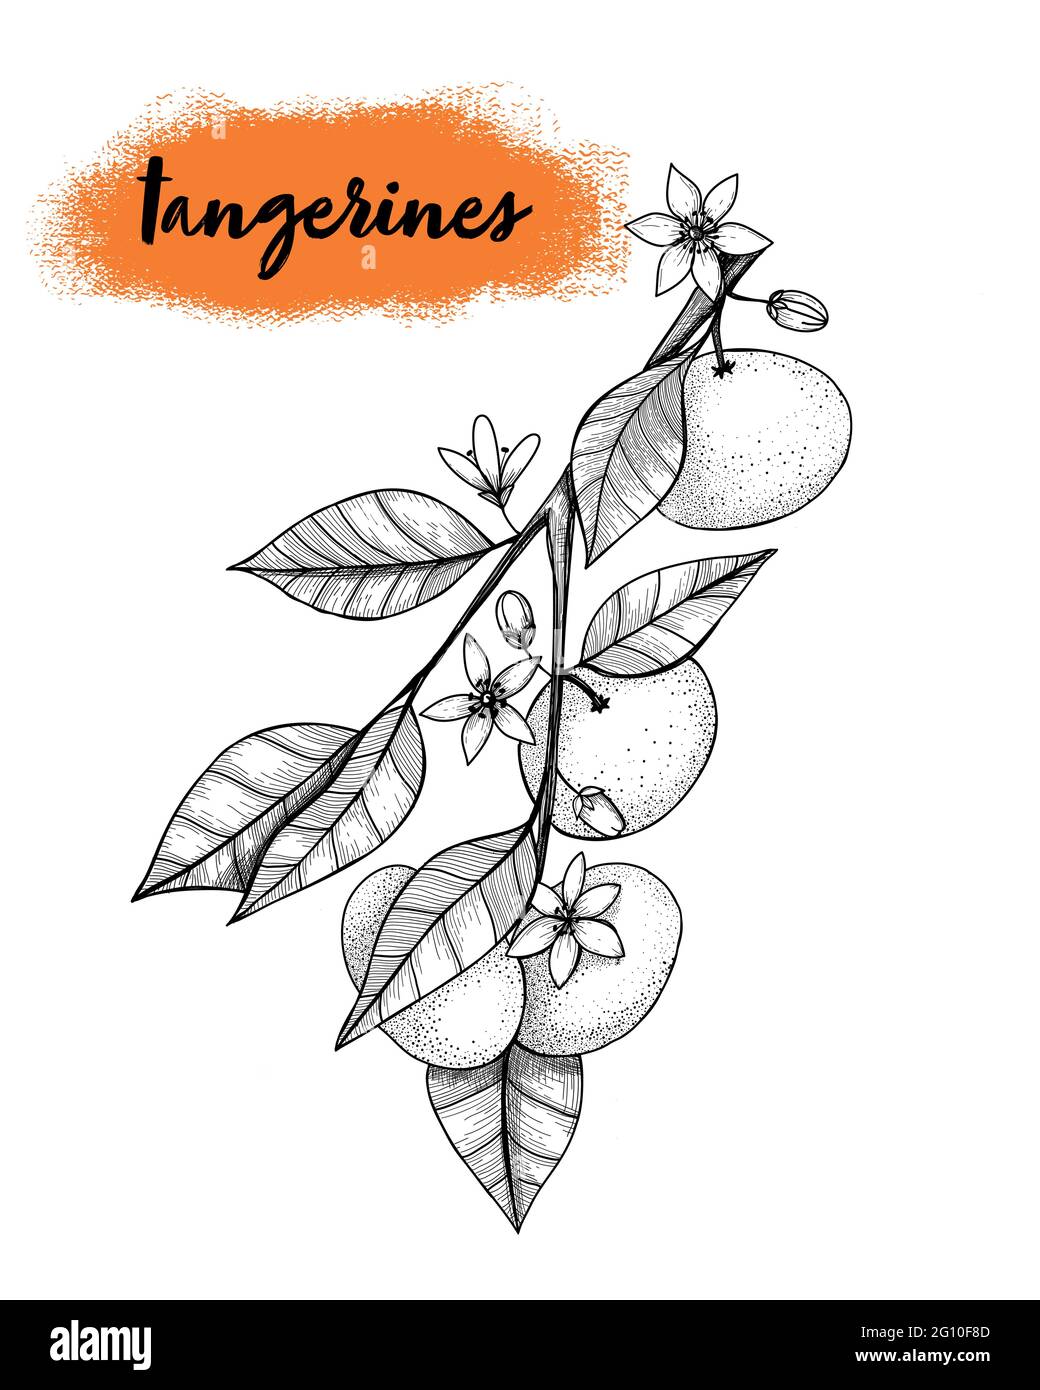 tangerines on a branch in engraved style. Vector hand drawn illustration Stock Vector